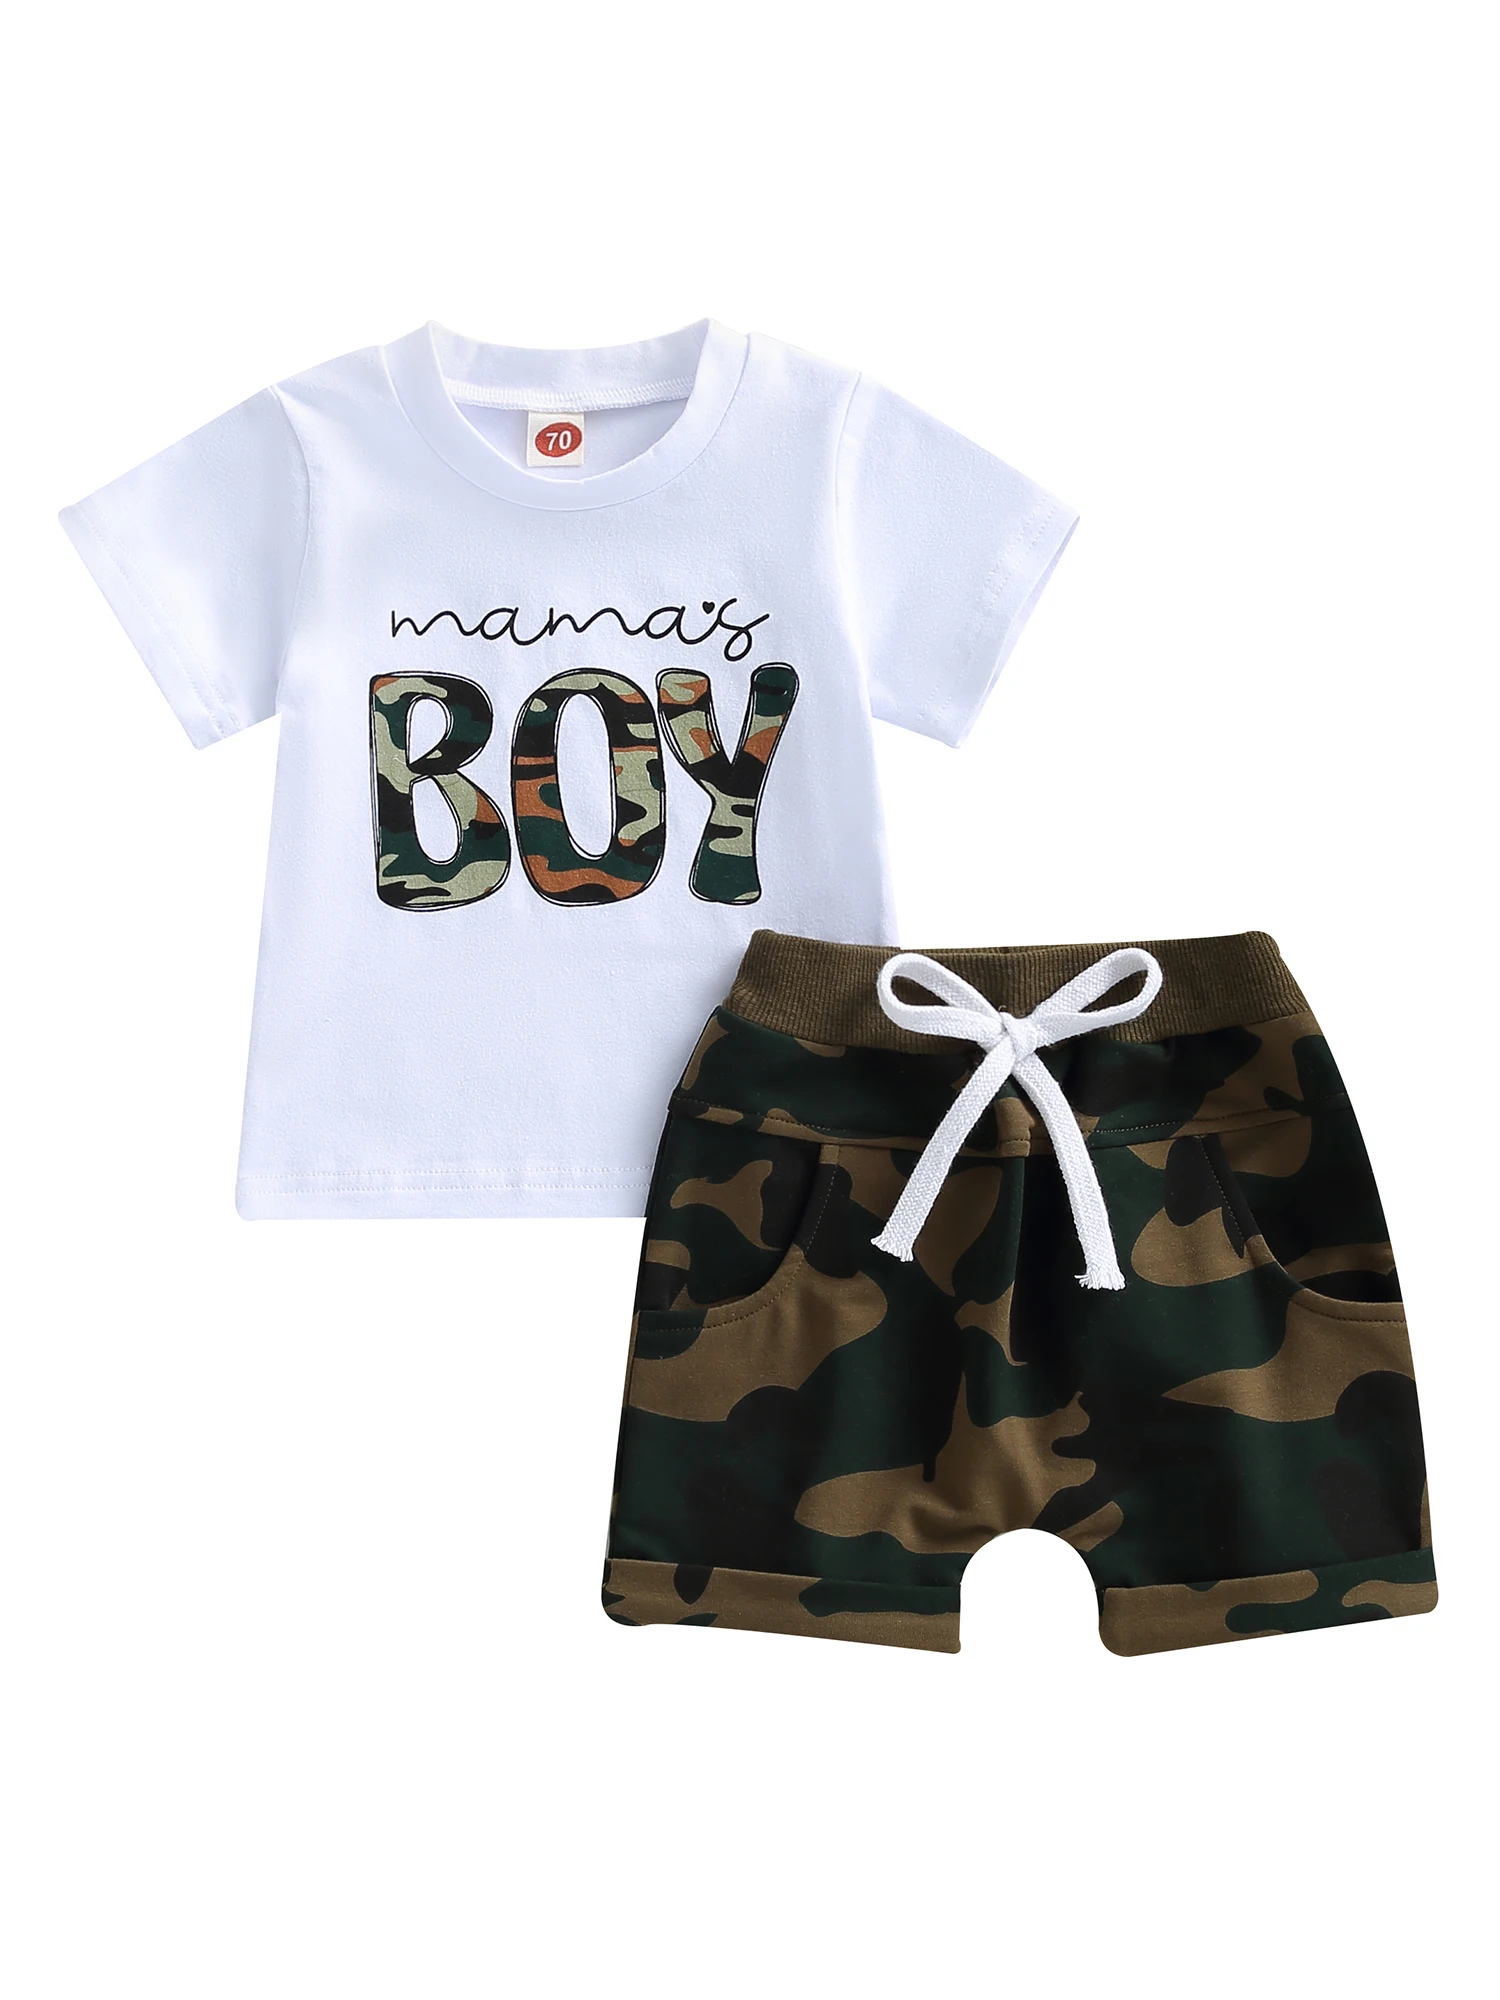 

Baby Boys Summer Clothes Mamas Boy Print Tshirt Casual Camouflage Drawstring Rolled Shorts Set 6 12 18 24 Months 3T